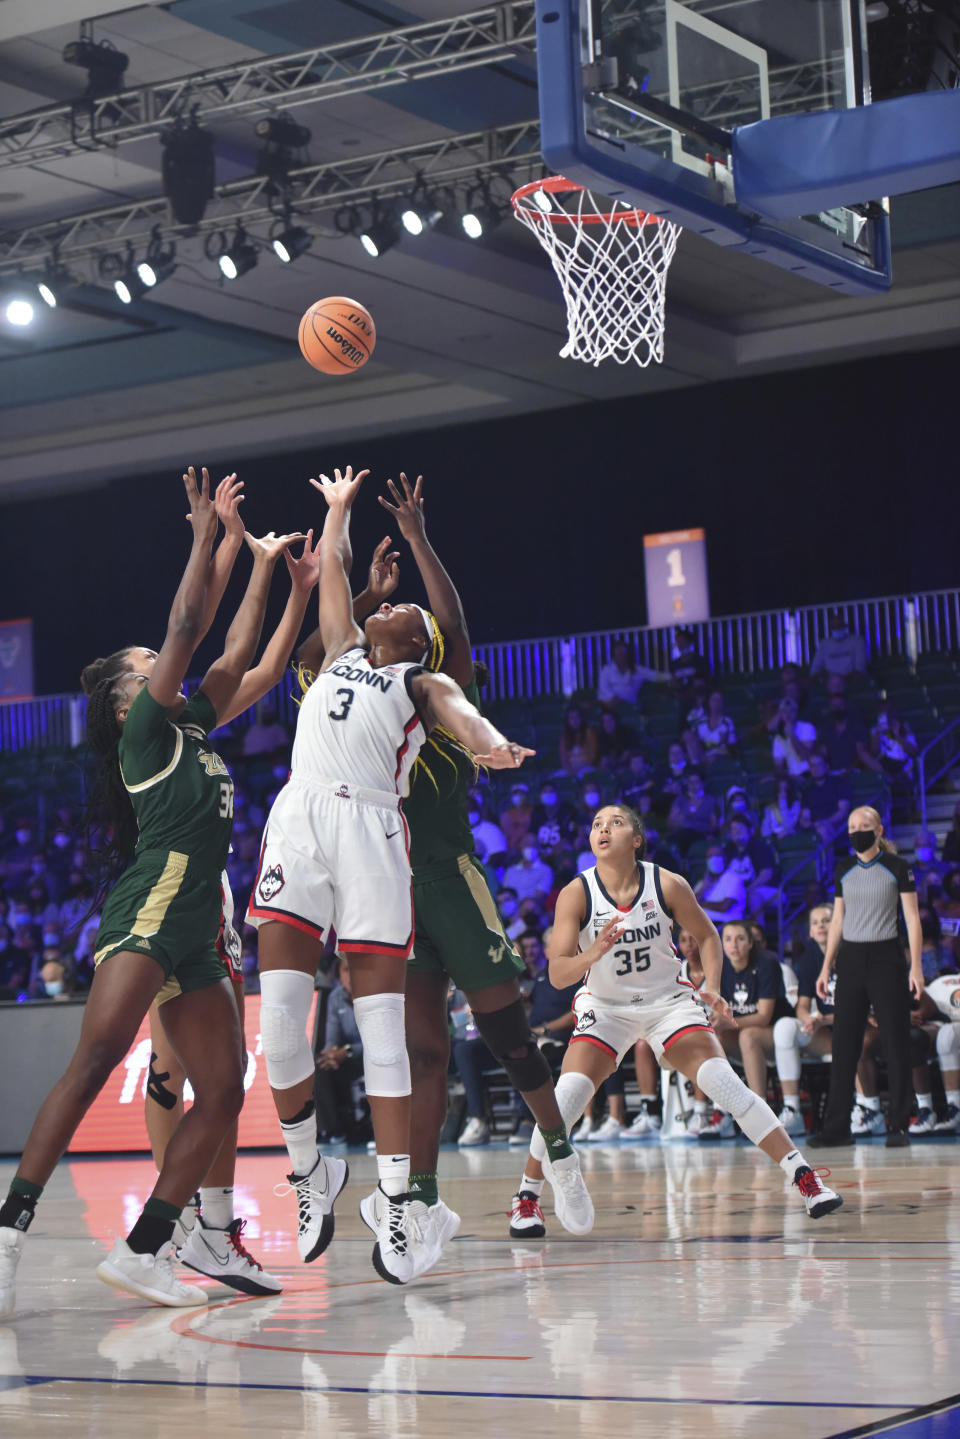 This photo provided by Bahamas Visual Services shows UConn forward Aaliyah Edwards (3) battling South Florida for the ball as UConn's Azzi Fudd (35) looks on during an NCAA college basketball game at Atlanta Paradise Island in Nassau, Bahamas, Sunday, Nov. 21, 2021. (Donald Knowles/Bahamas Visual Services via AP)